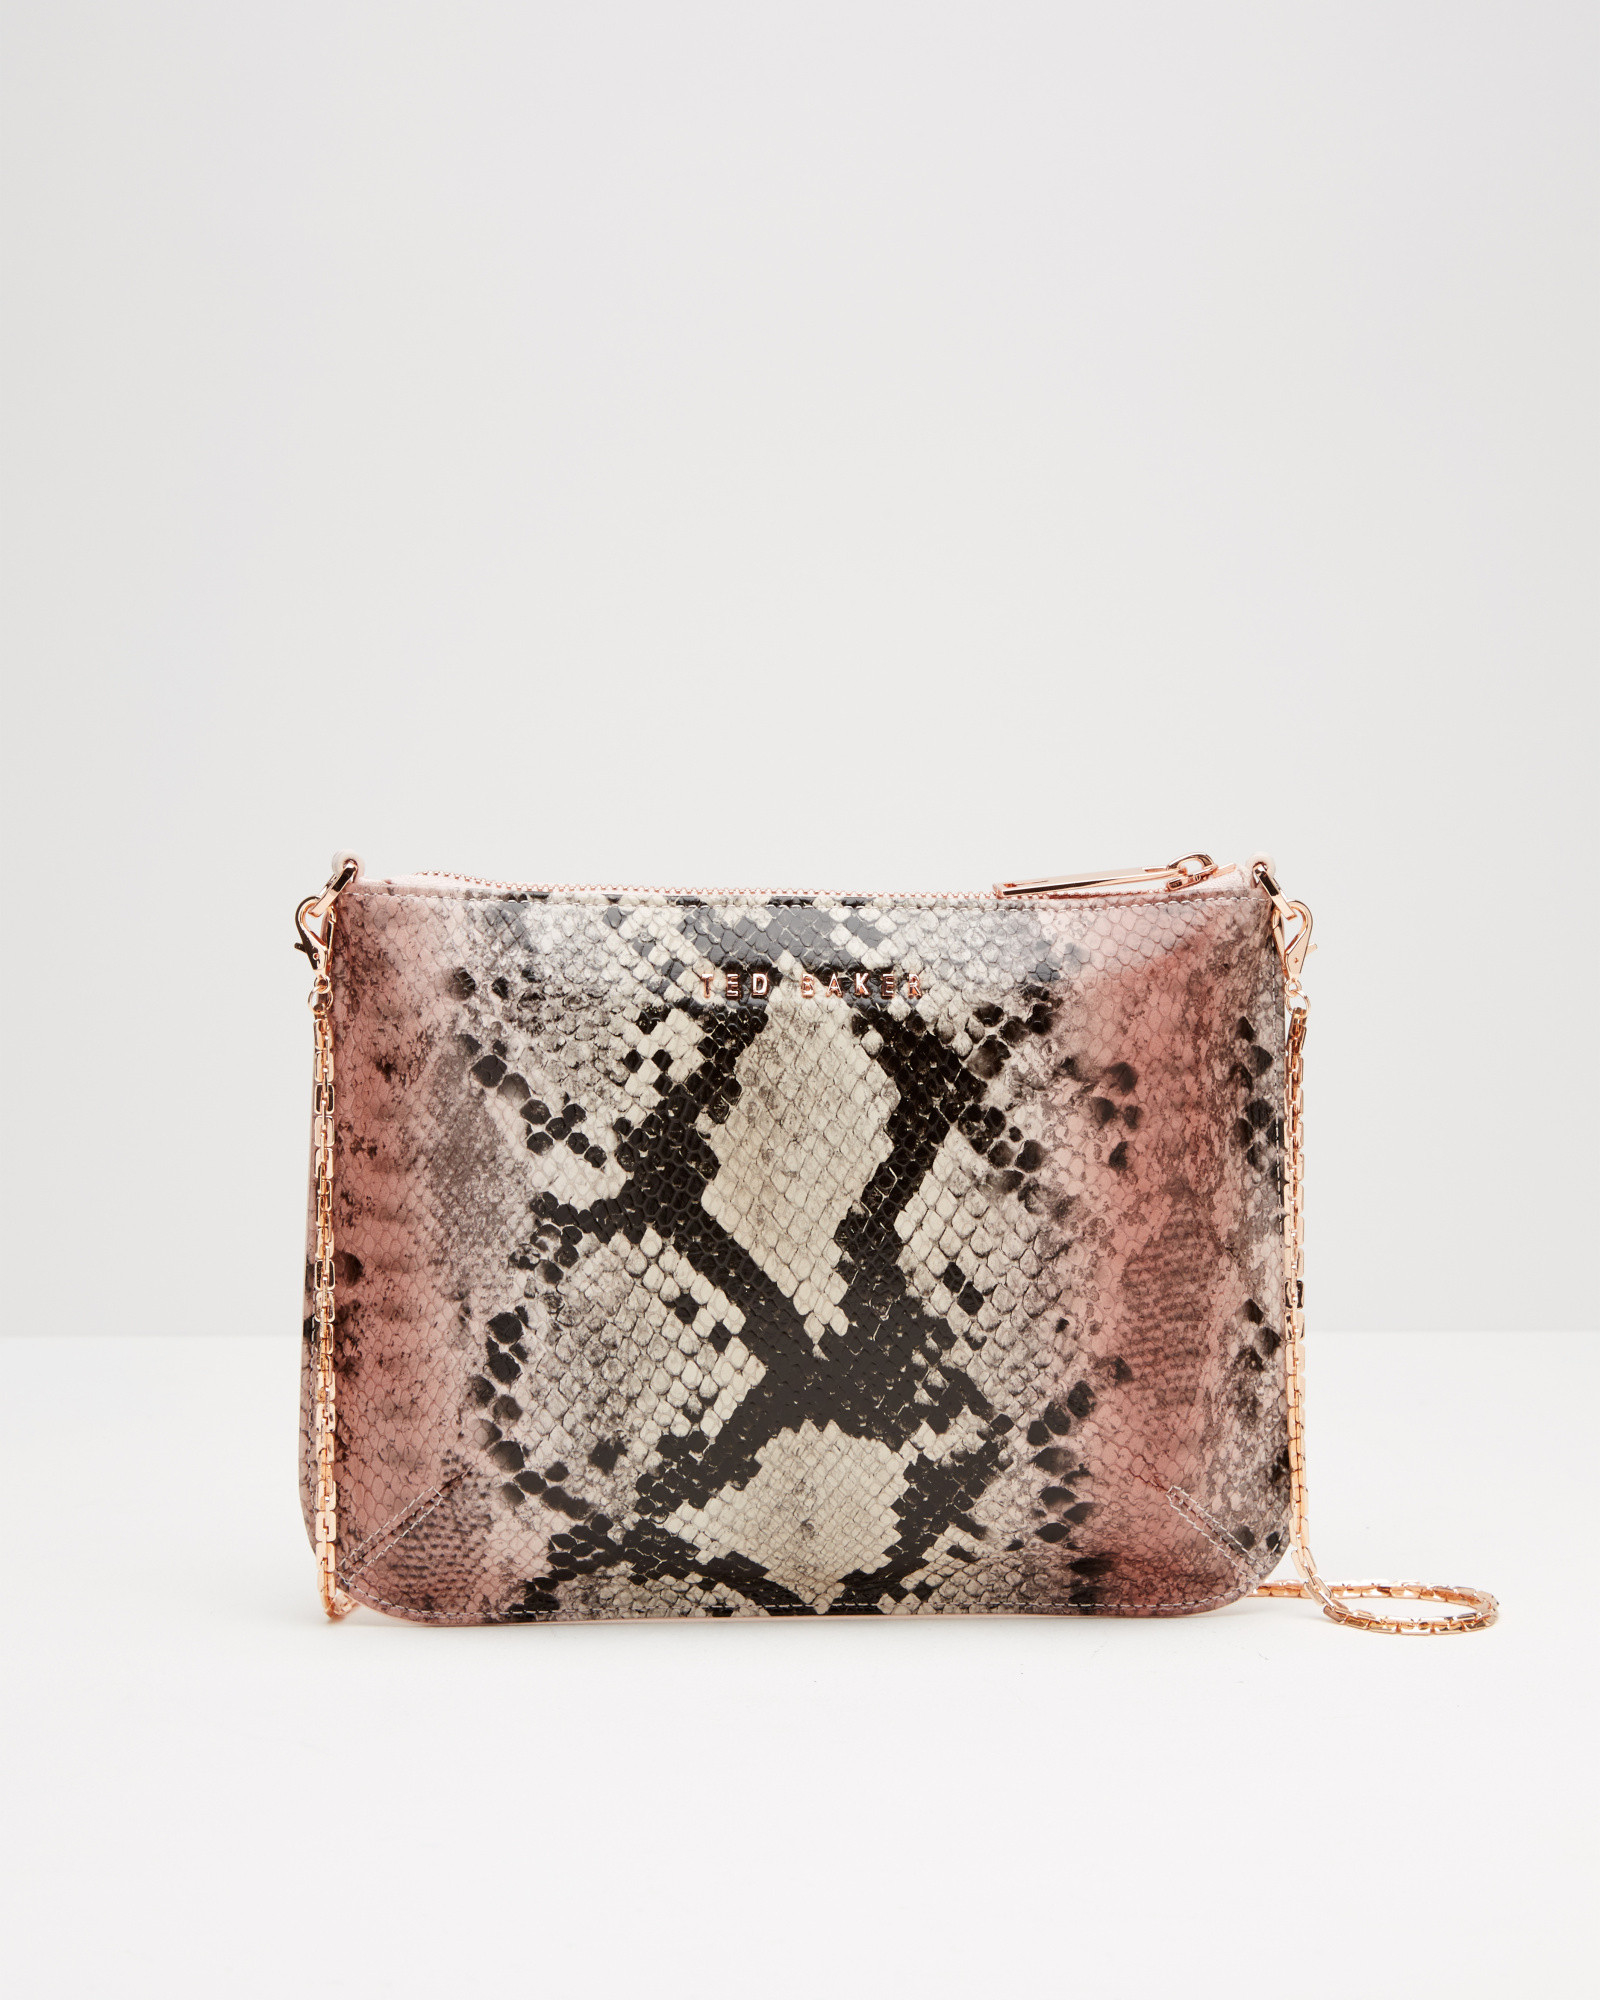 Ted Baker Snake Print Leather Clutch Bag in Pink - Lyst